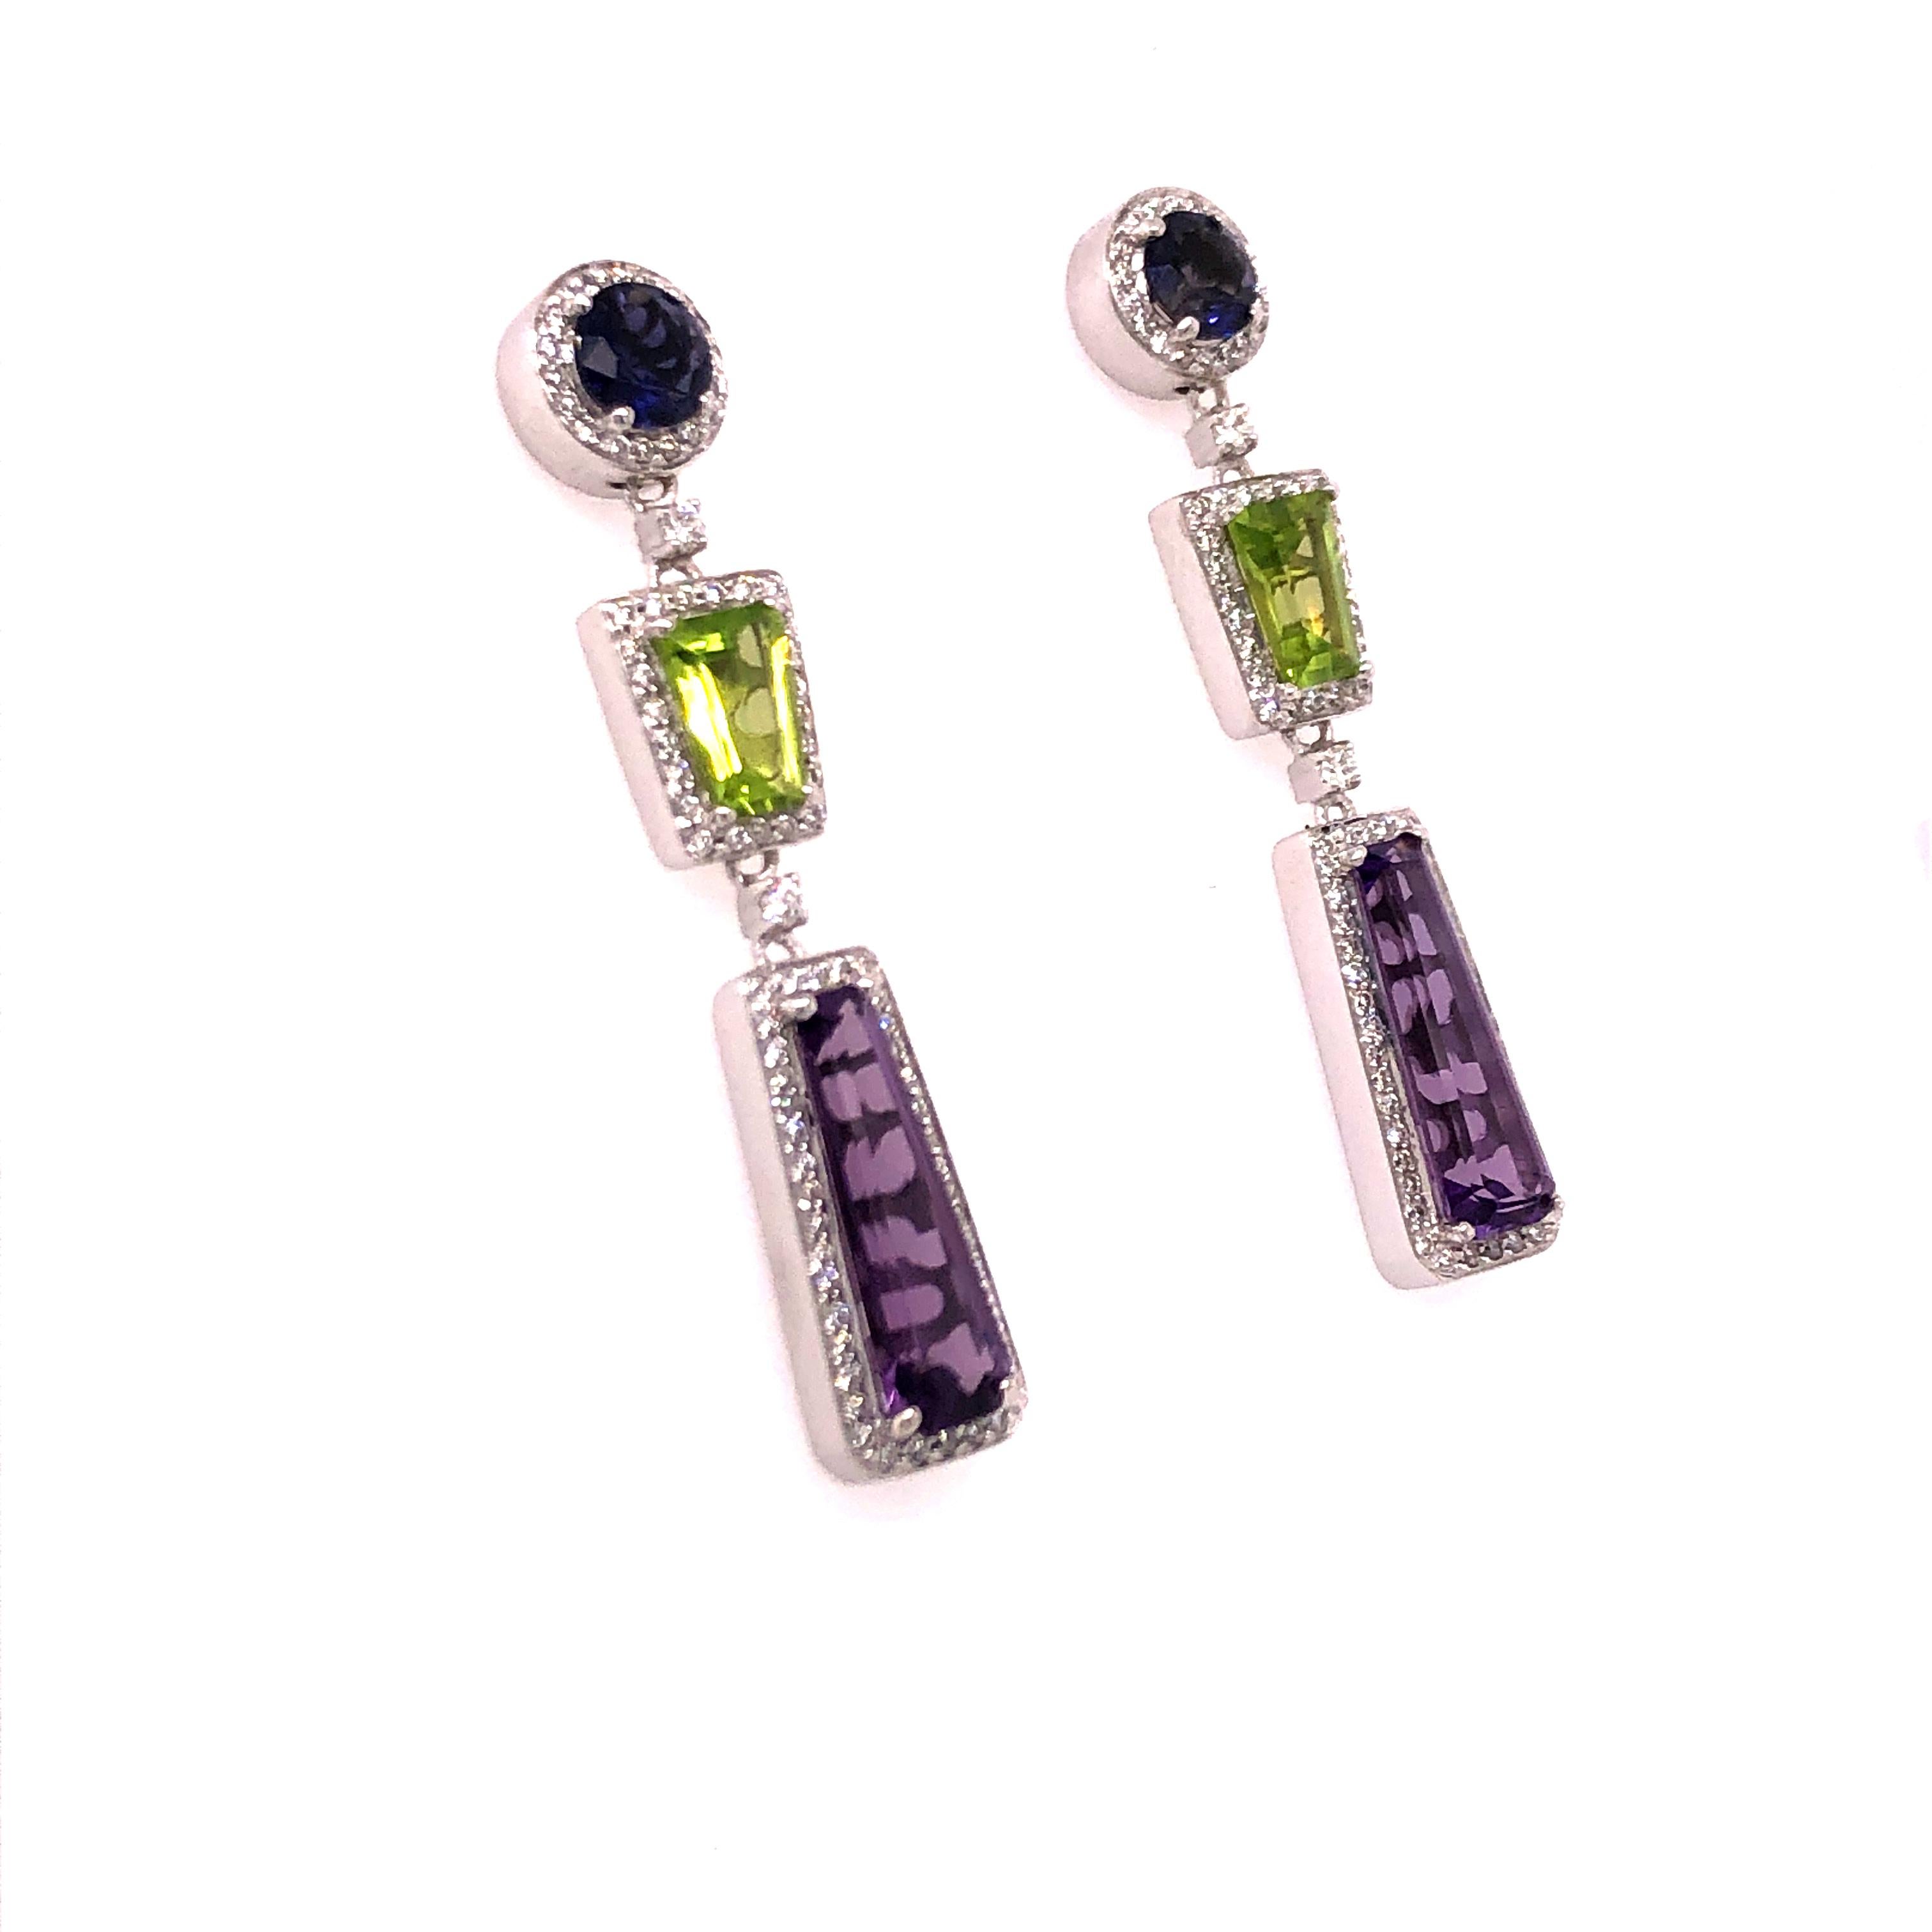 These 14K white gold multi colored stone earrings bring a splash of color to your style. Each of the three geometric shaped stones are surrounded by a halo of diamonds. Where it with the matching necklace (sold separately)! 

